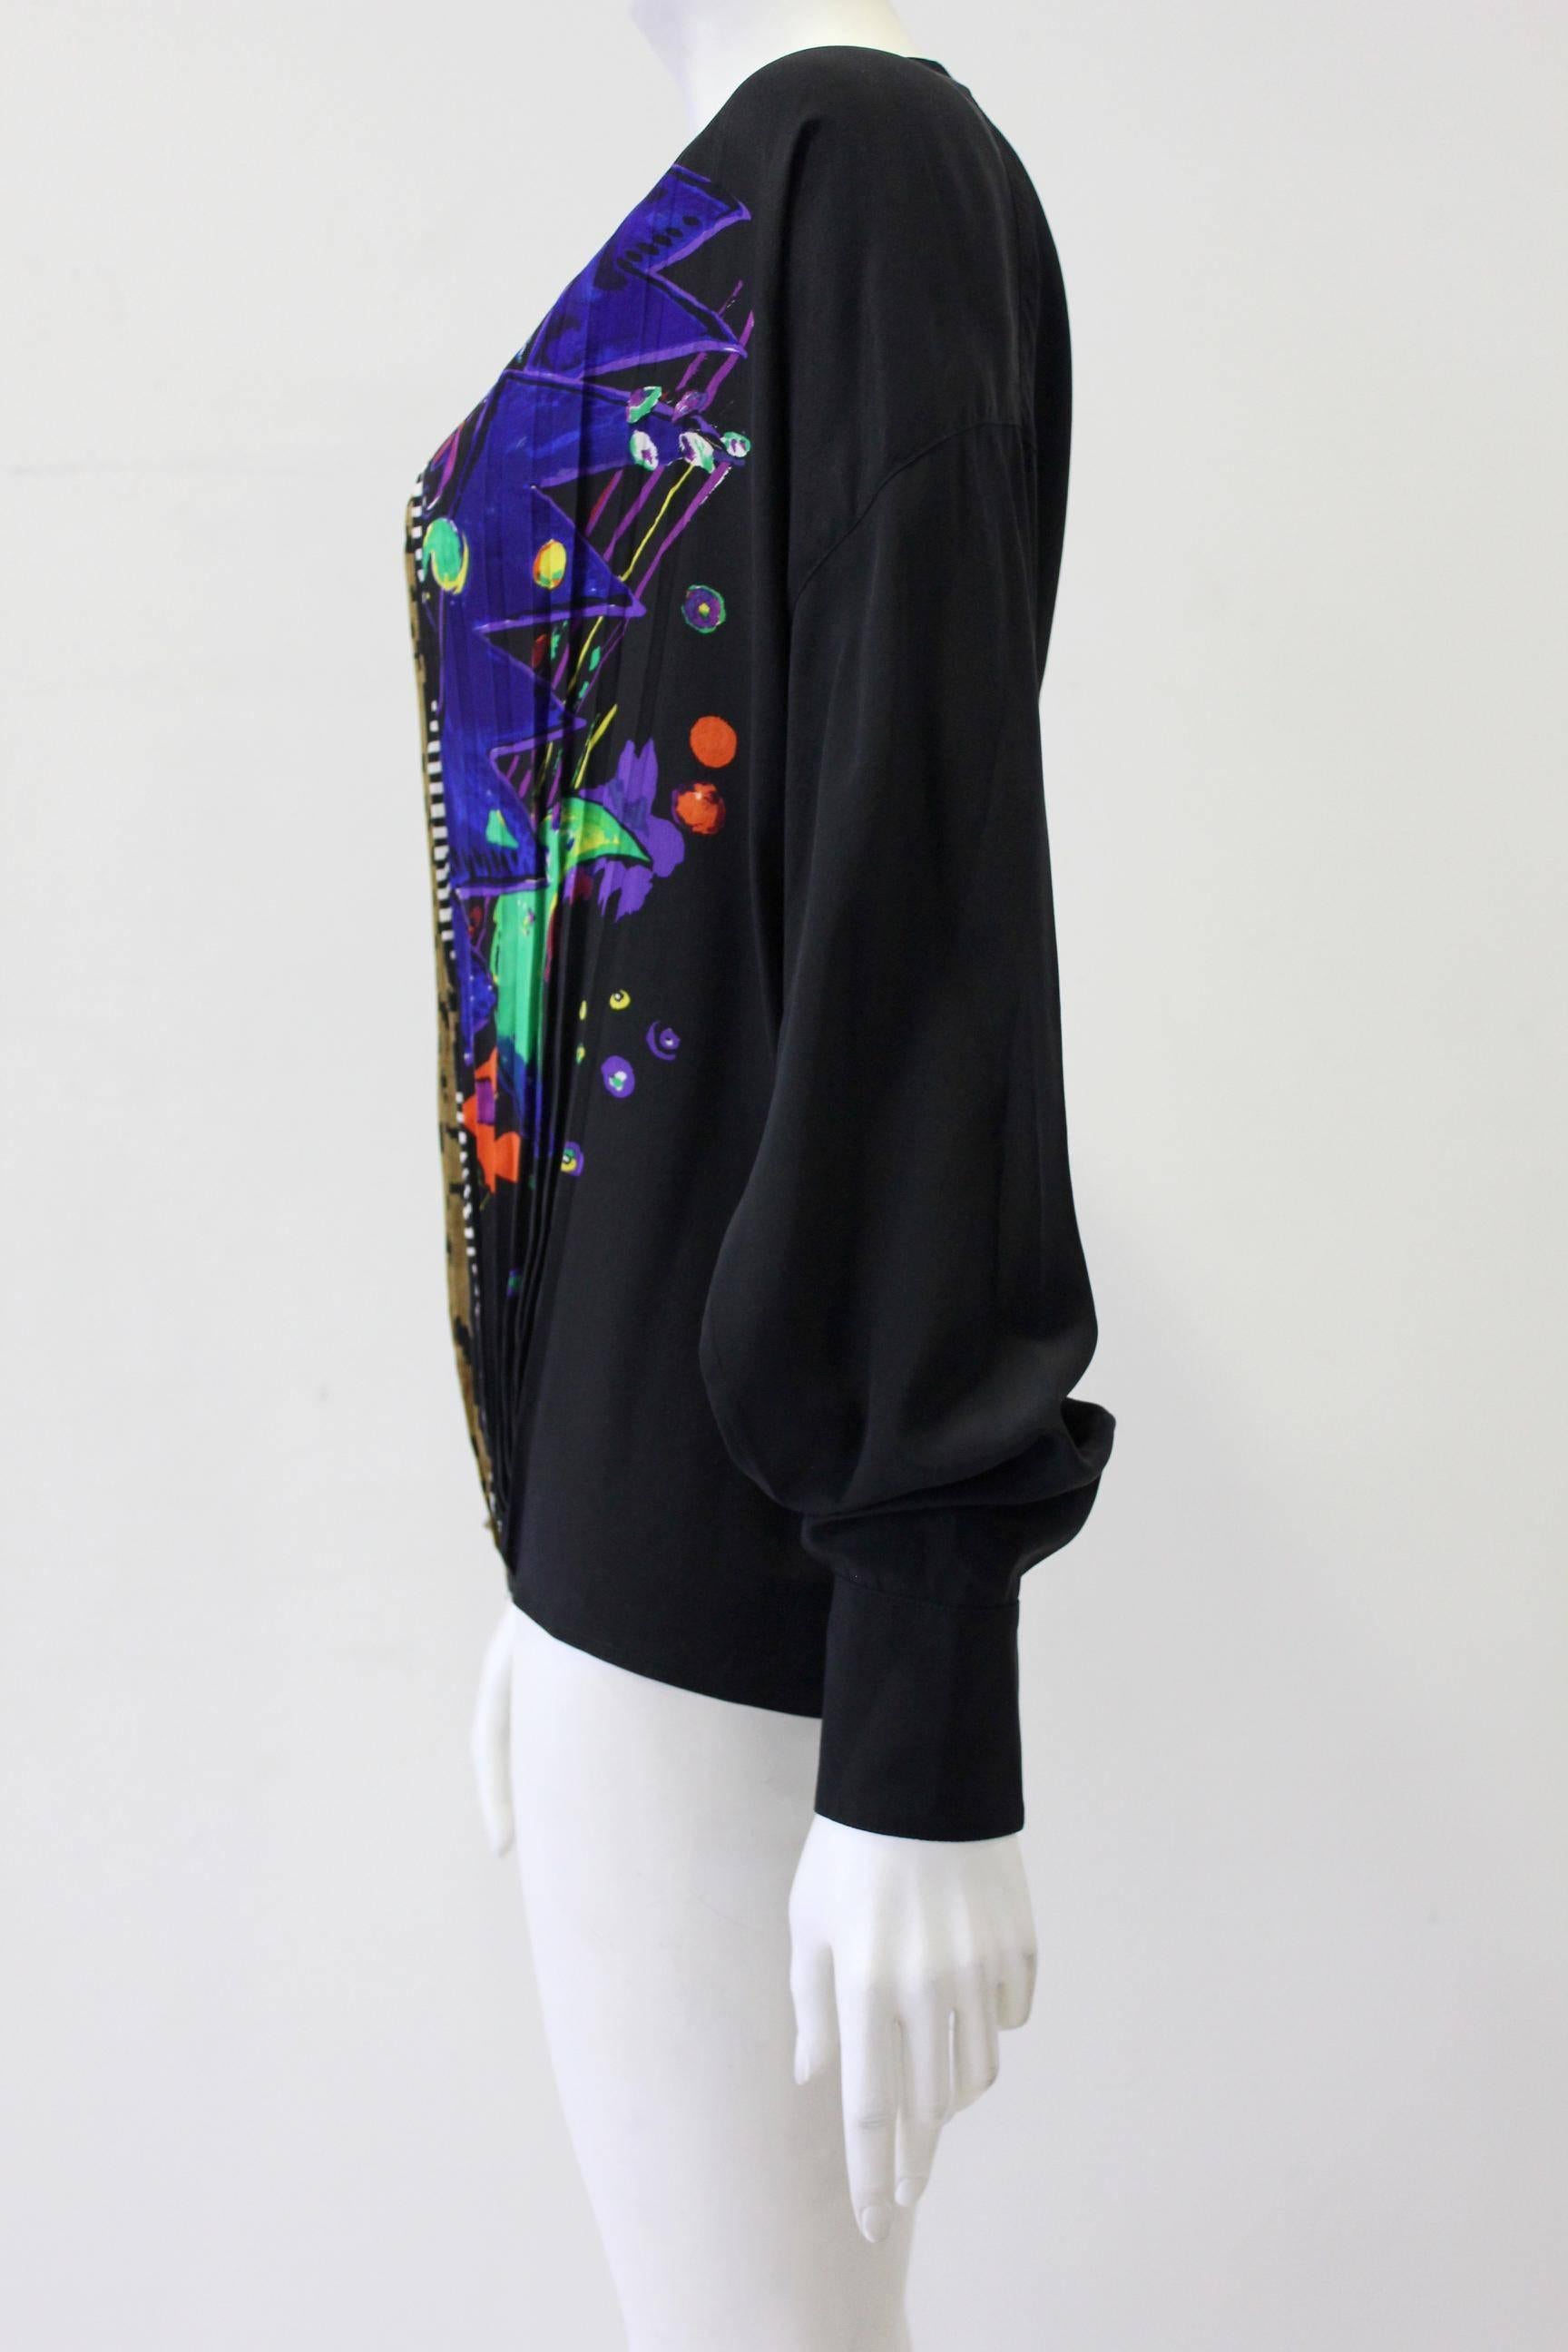 Very Rare Gianni Versace Silk Plisse Printed Shirt Fall 1989 In New Condition For Sale In Athens, Agia Paraskevi